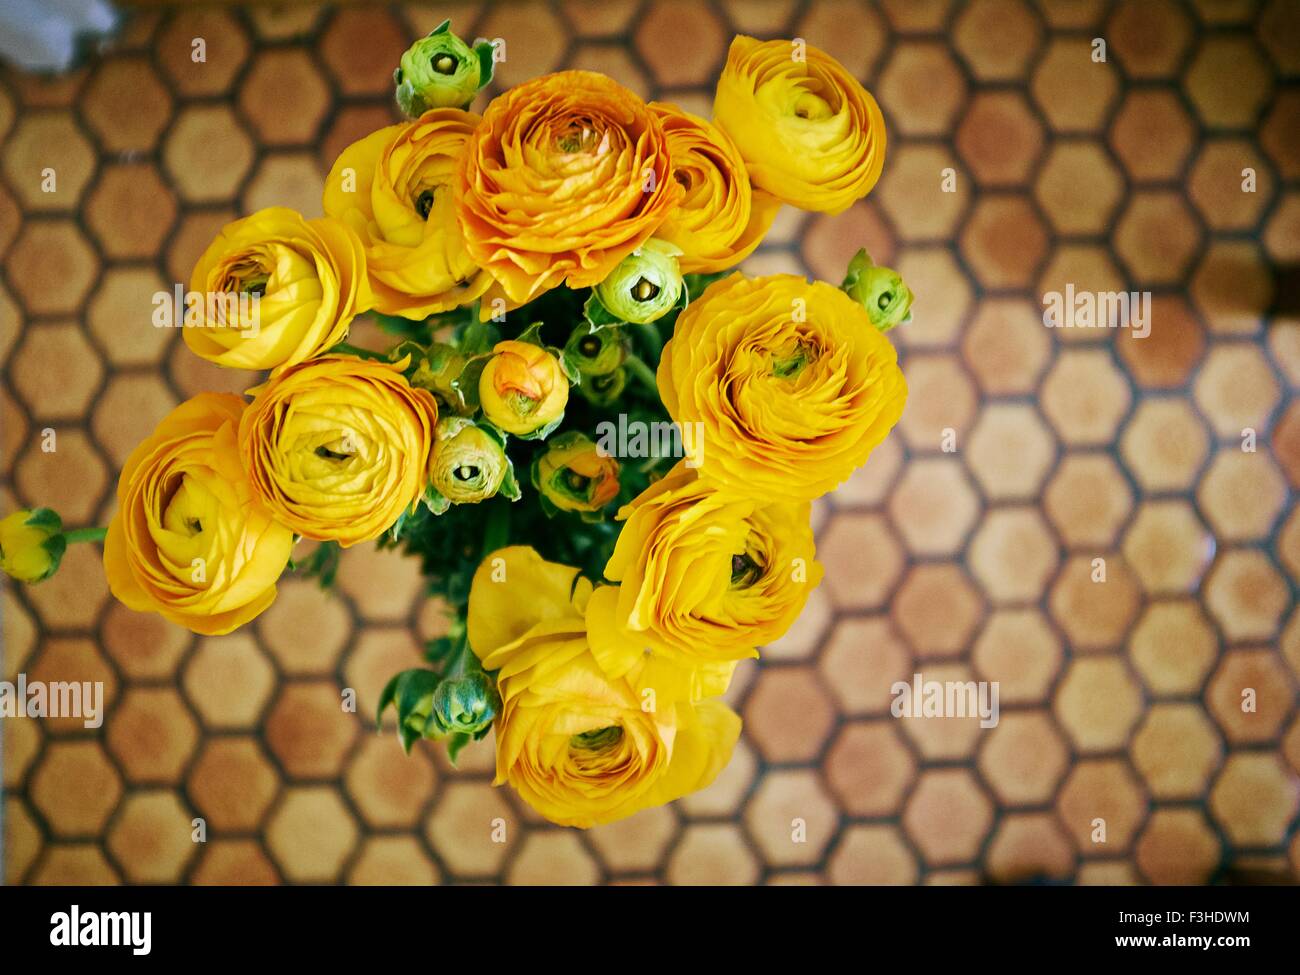 Overhead view of a bunch of yellow roses against honeycomb linoleum floor Stock Photo